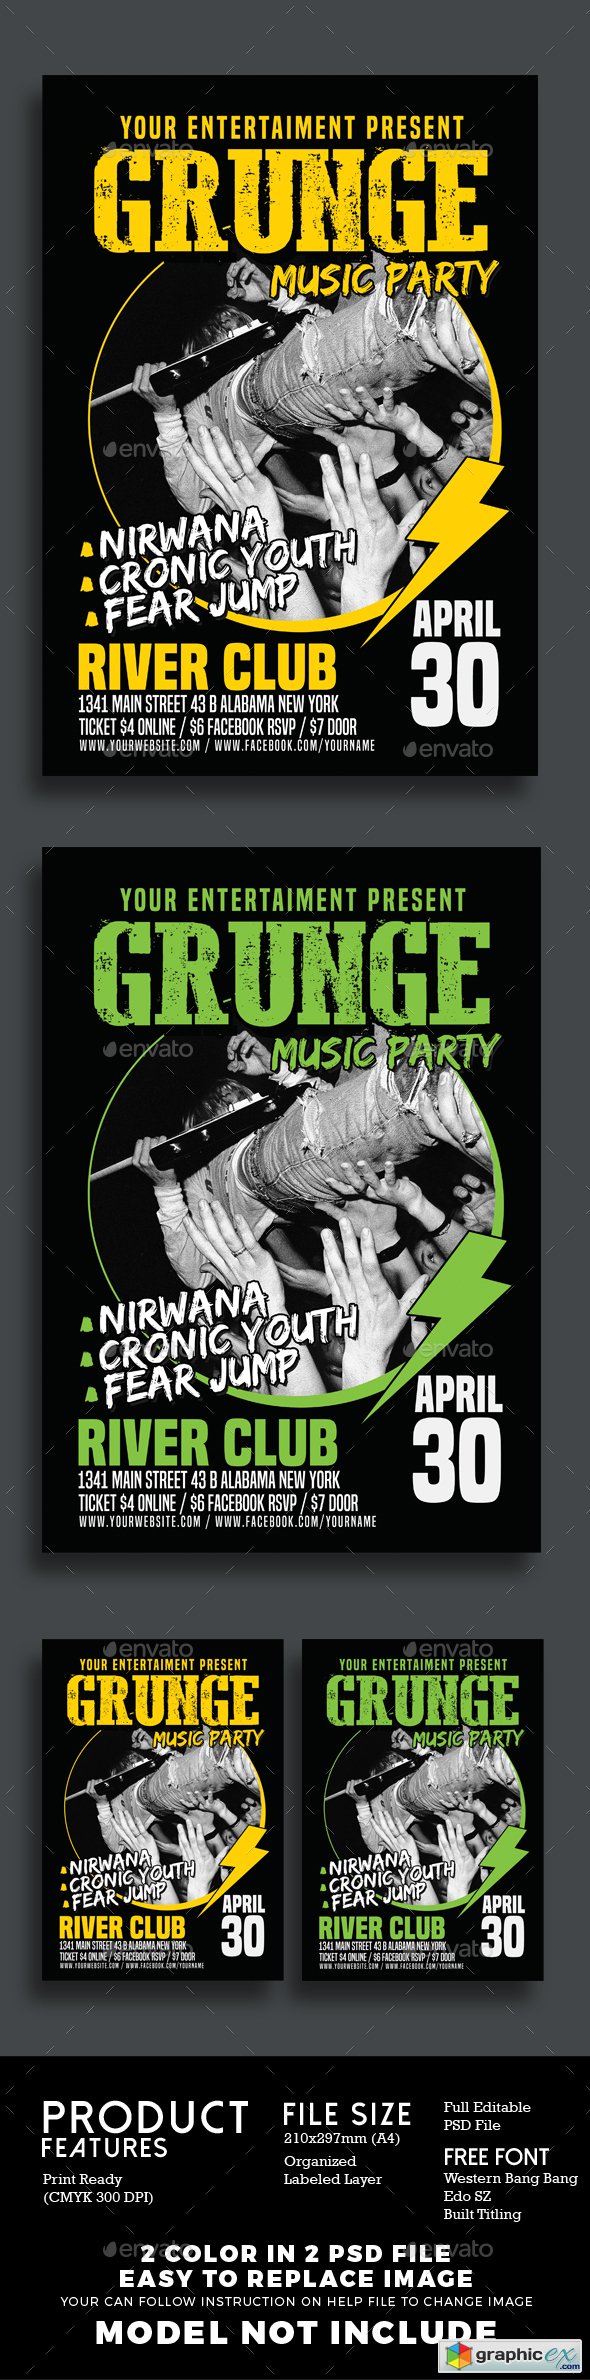 Grunge Music Party Poster Flyer